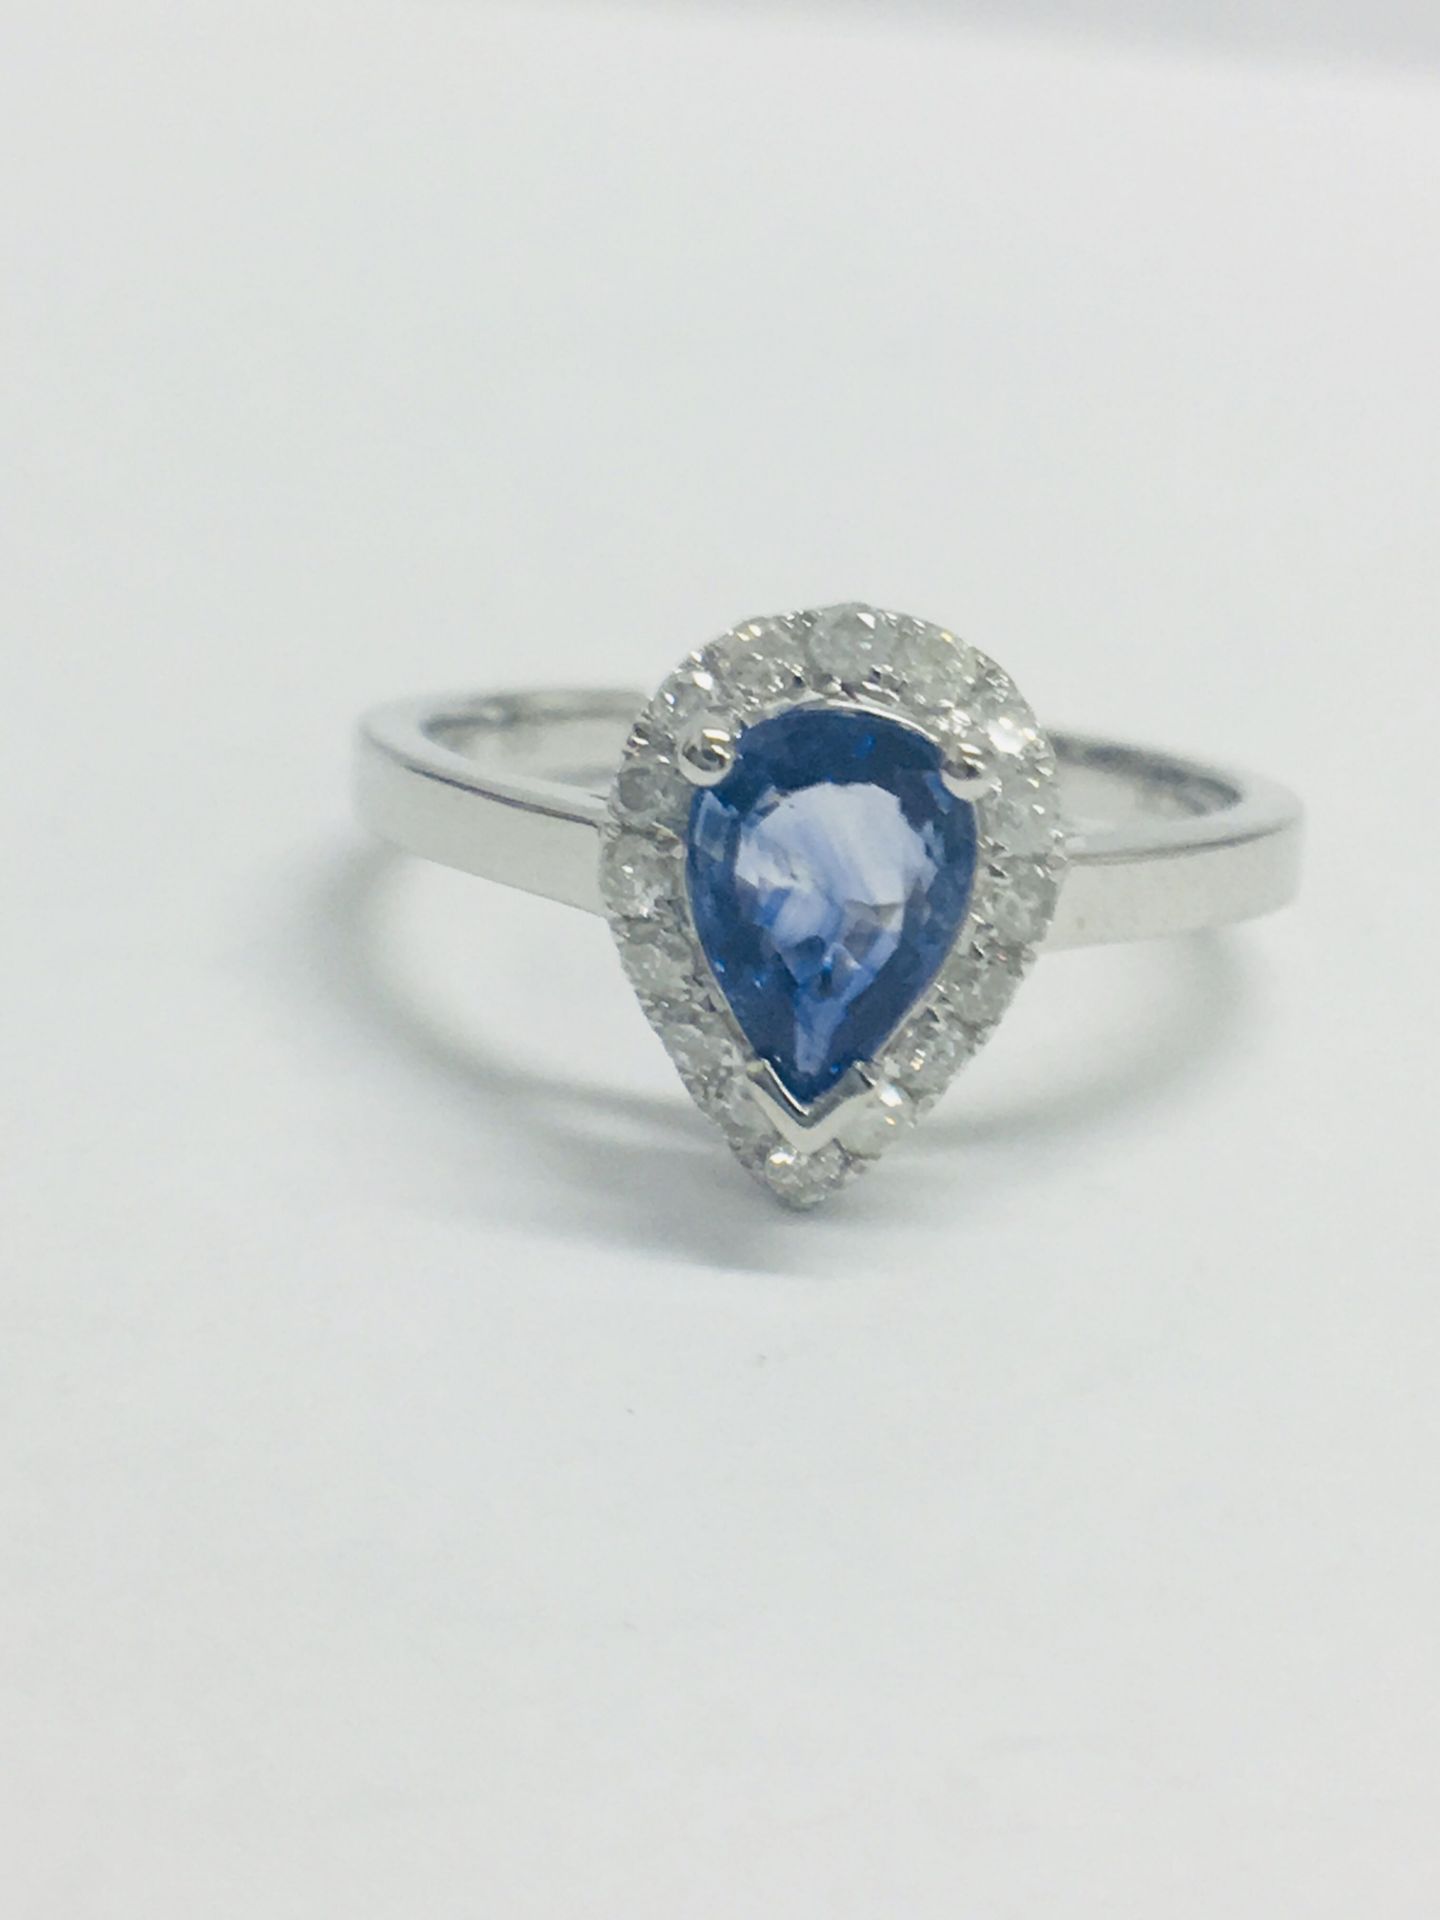 14ct White Gold Sapphire and Diamond Ring - Image 8 of 10